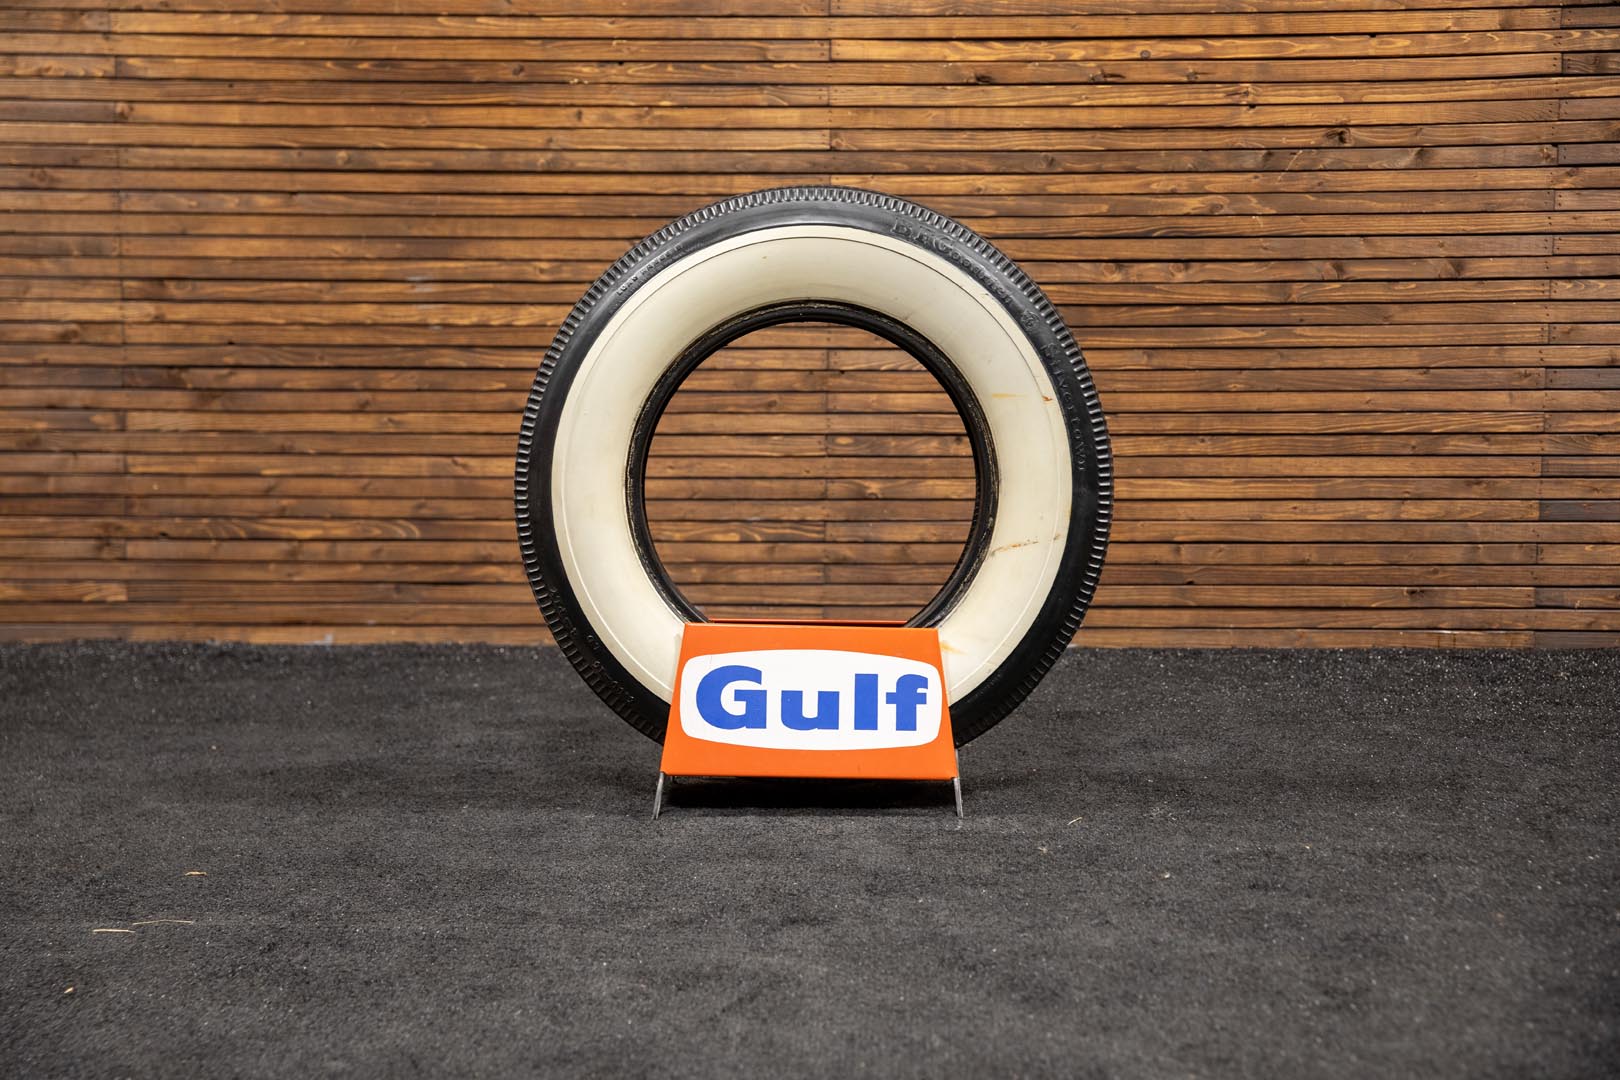  Gulf Gas Tire Holder with Vint age Whitewall Tire 